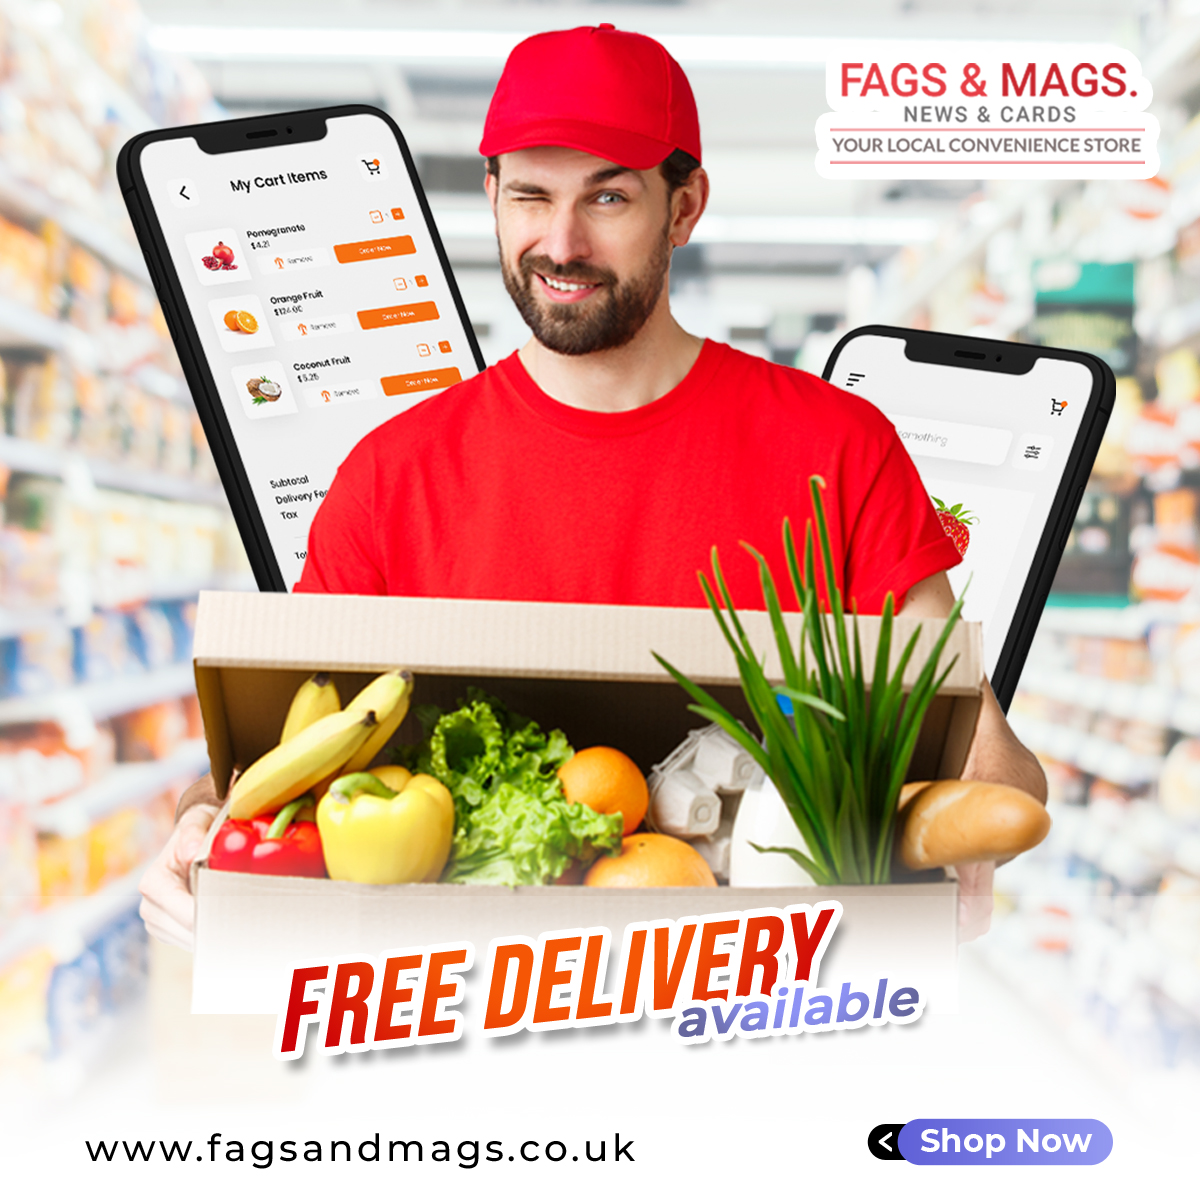 At Fags and Mags we partner with exceptional food producers, many of whom provide us with products unique to the grocery delivery market.

#freedelivery #orderonline #orderathome #orderdelivery #DeliveryFree #fooddelivery #grocery #Dagenham